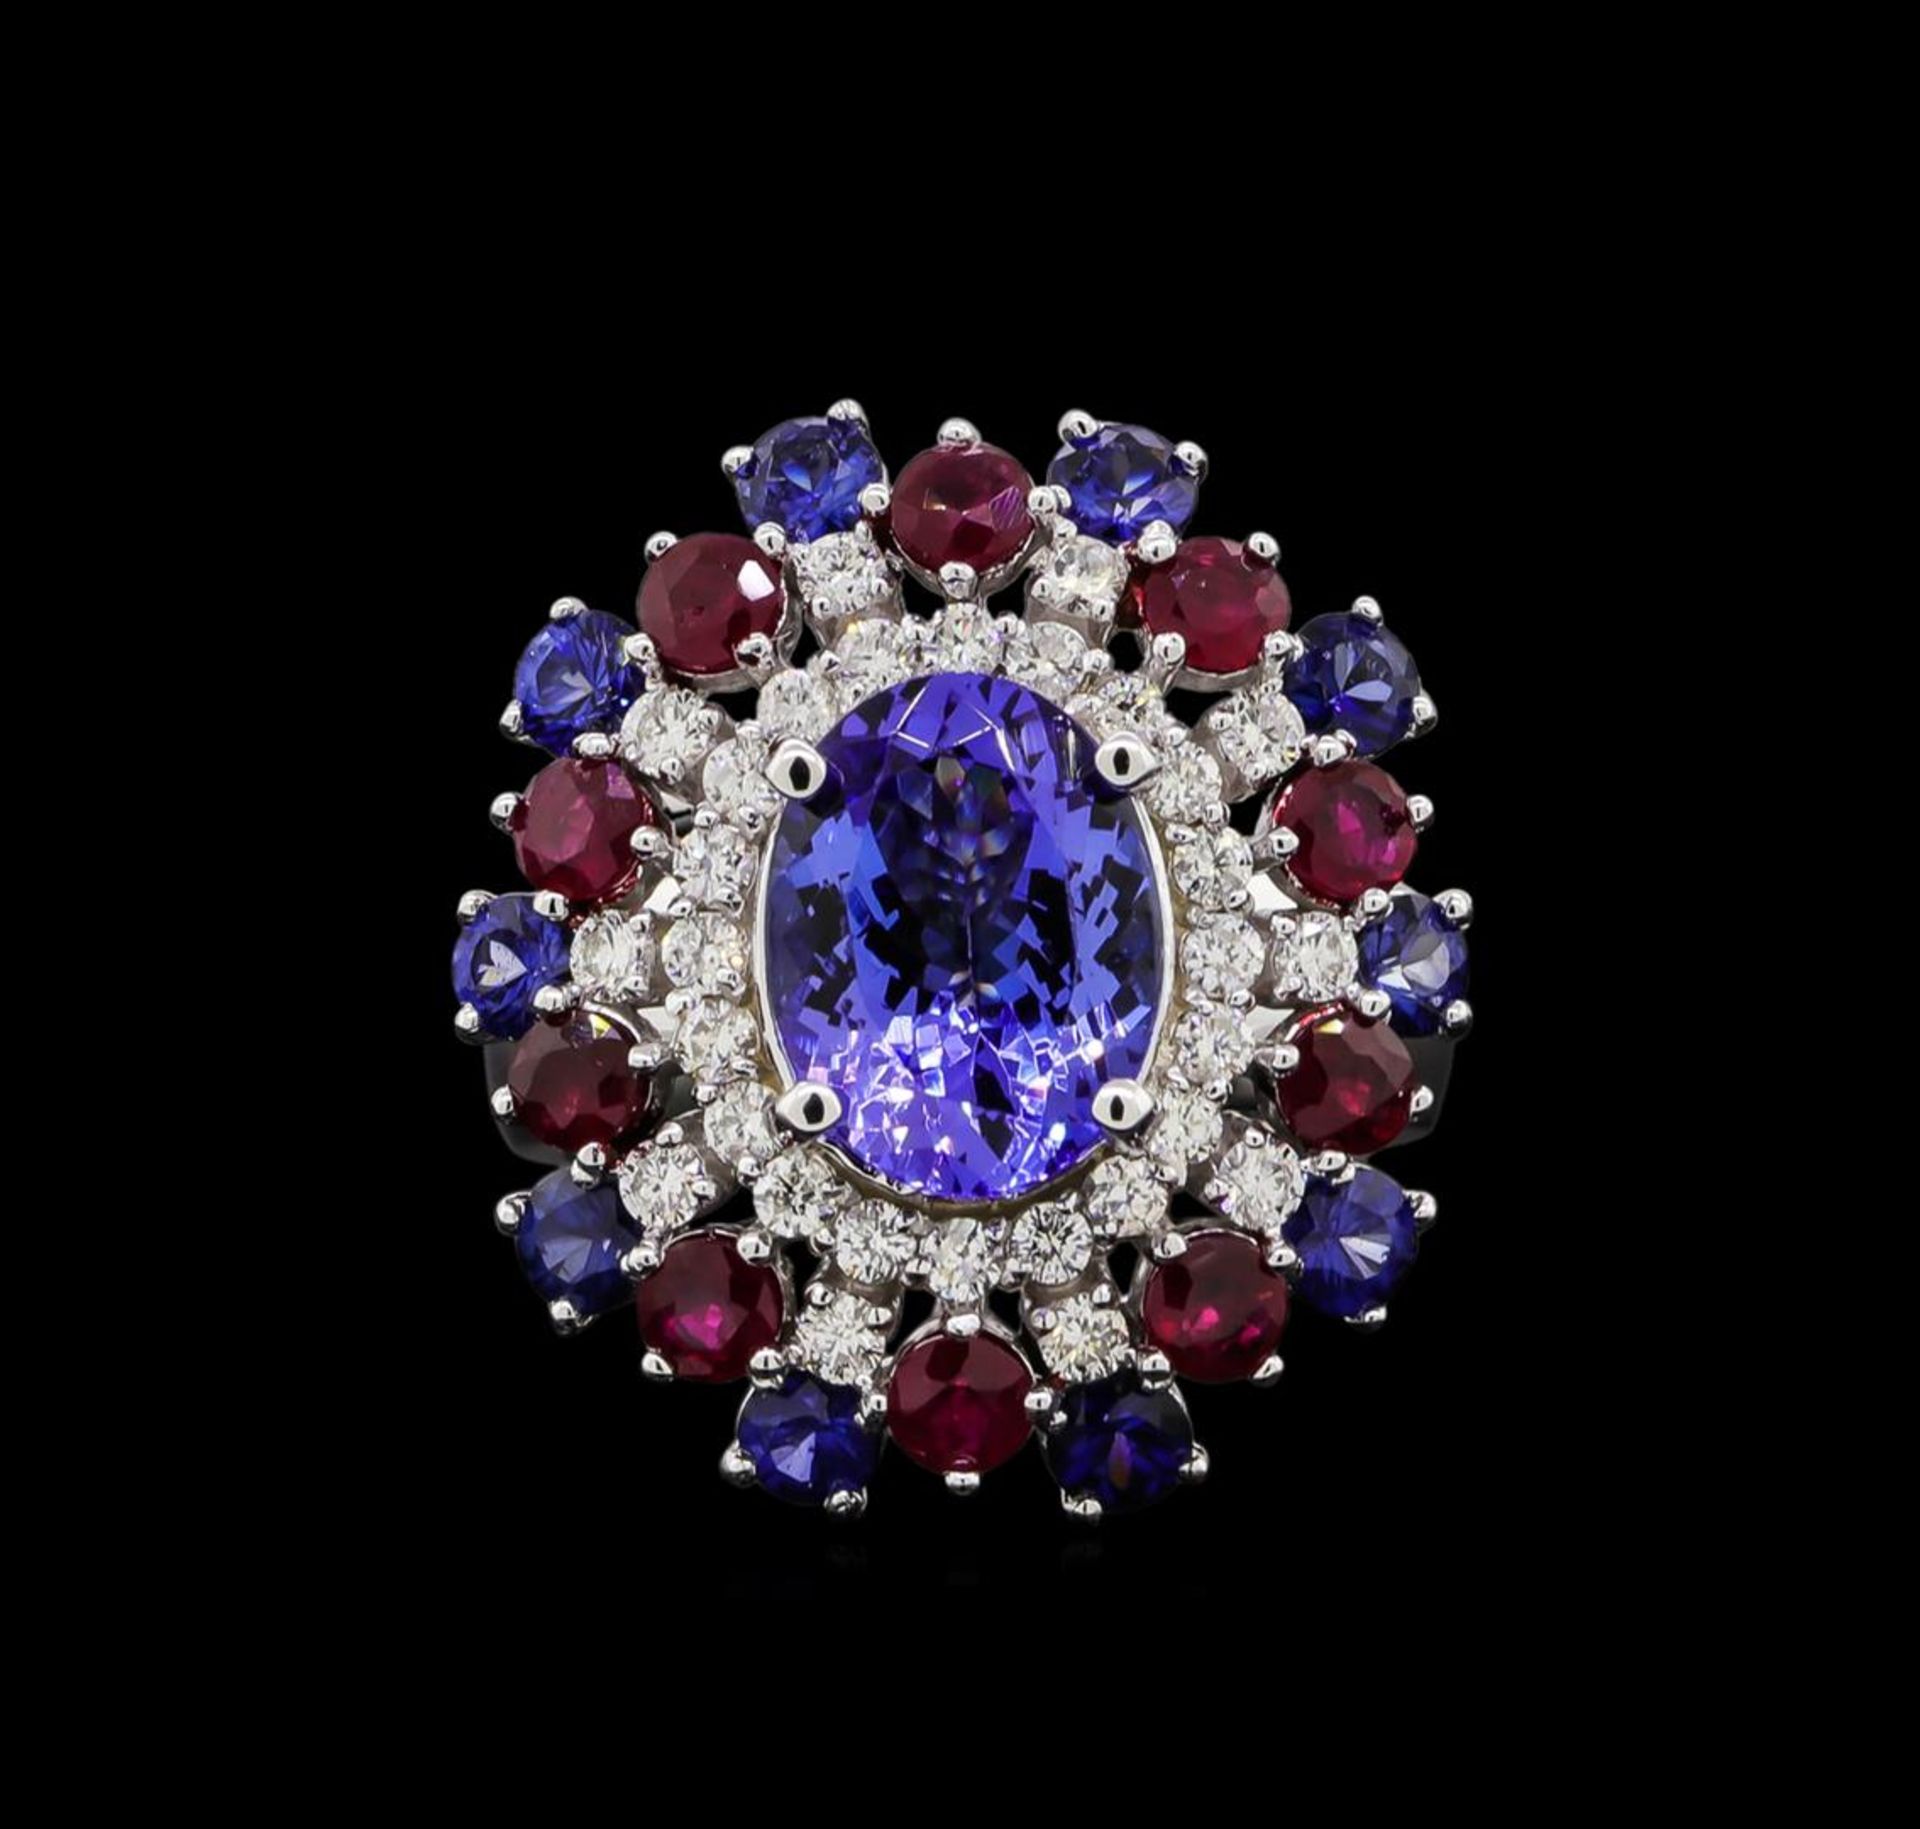 14KT White Gold 3.58 ctw Tanzanite, Sapphire, Ruby and Diamond Ring - Image 2 of 5